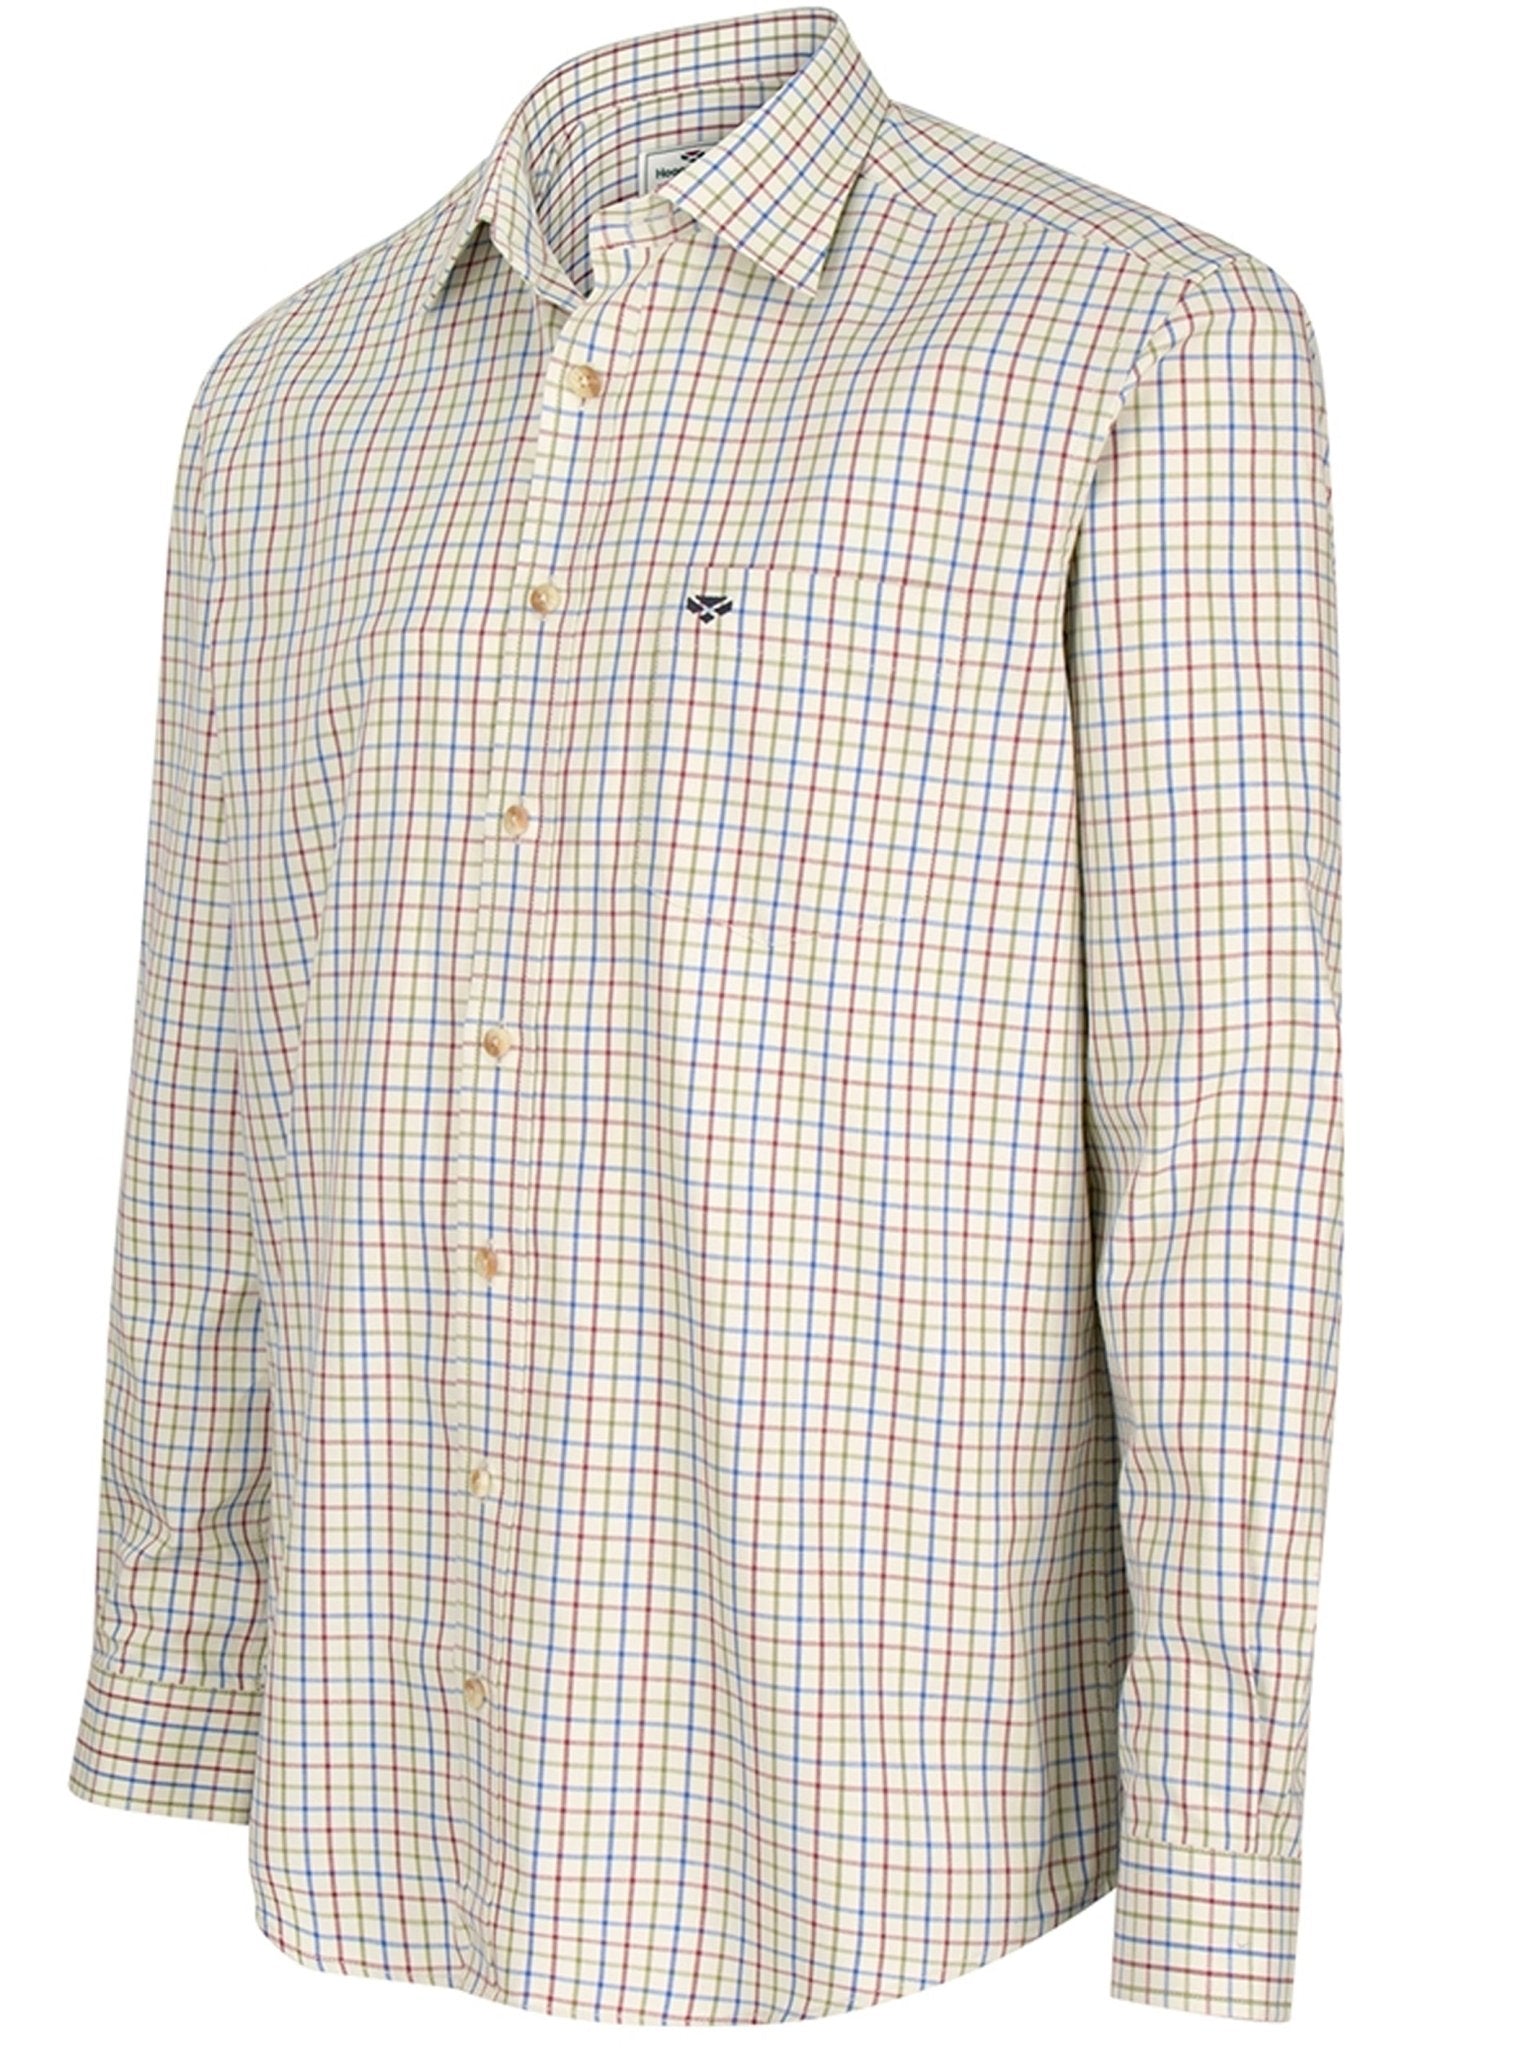 4elementsclothingHoggs of FifeHoggs of Fife - Mens Shirt / Long sleeve check shirt - country casual style - Inverness shirtShirtINVS/WB/1